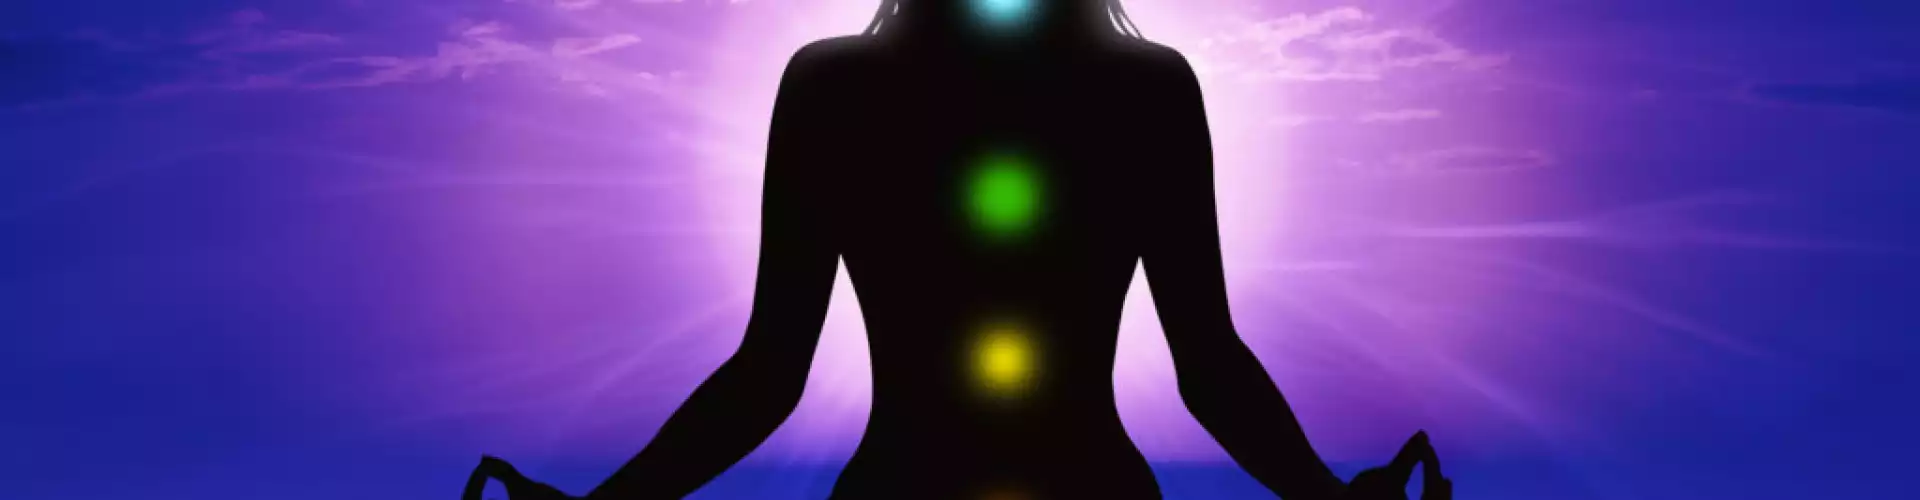 How to Identify When Your Chakras are Out of Balance Using a Crystal Pendulum